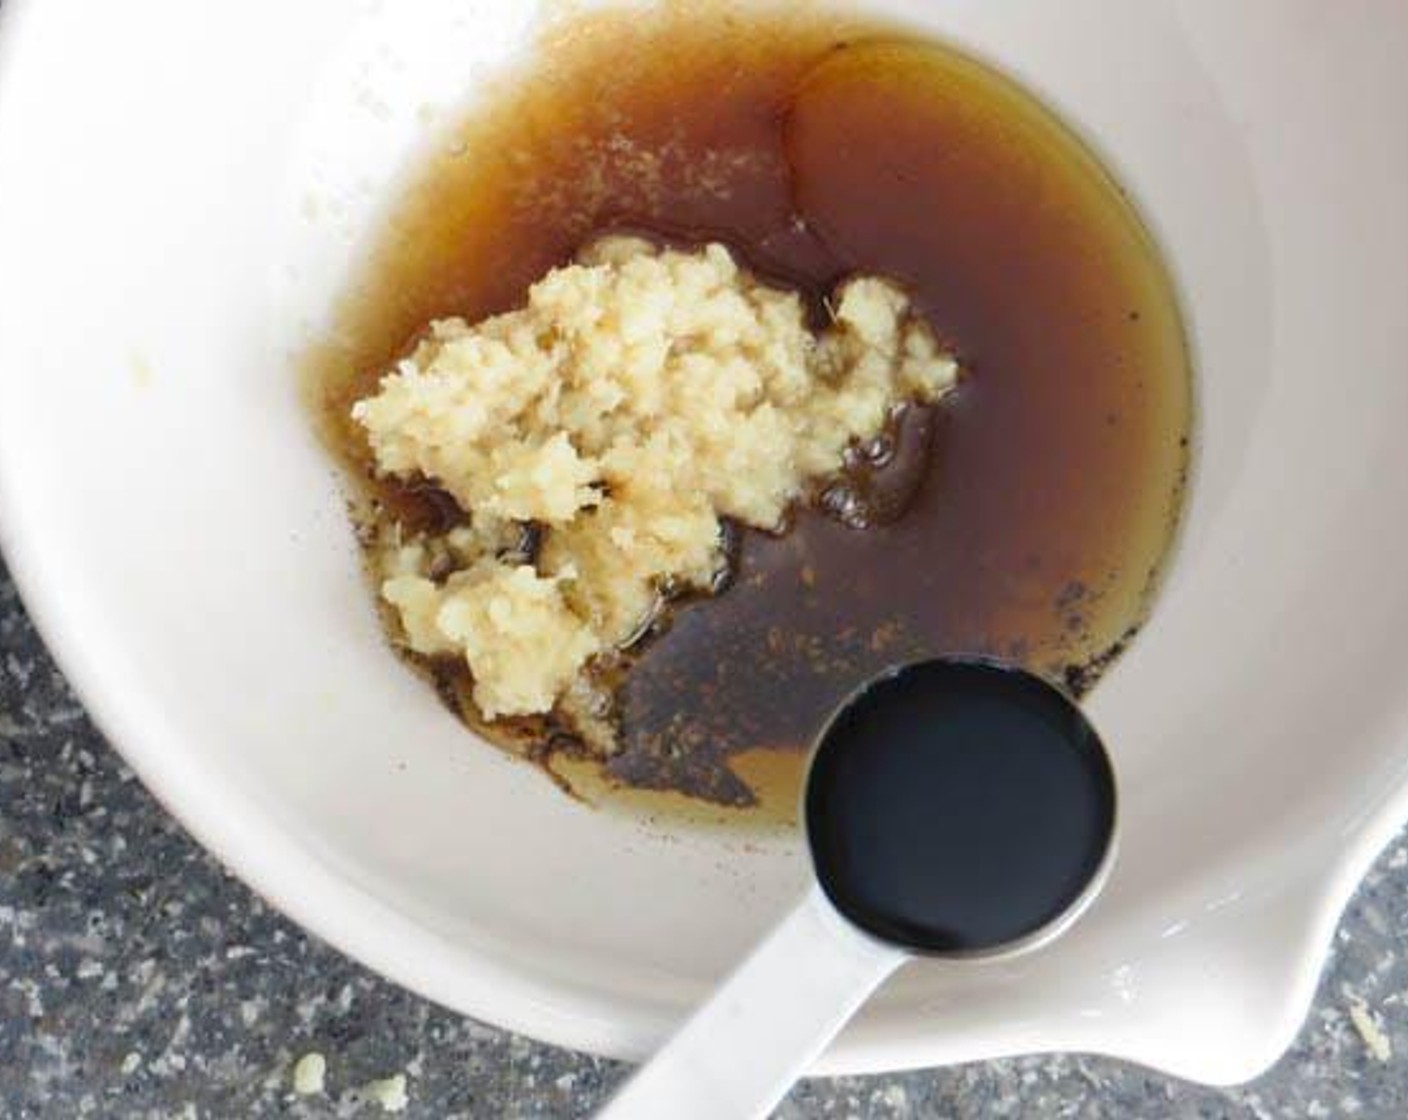 step 1 To make the vinaigrette, combine zest and juice from the Limes (2 1/4), Brown Sugar (1 1/2 Tbsp), Fish Sauce (1/2 Tbsp), Sesame Oil (1/2 Tbsp), Fresh Ginger (1/2 Tbsp), Soy Sauce (1/2 tsp), and Freshly Ground Black Pepper (1/4 tsp) in a small bowl. Whisk. Cover and refrigerate.